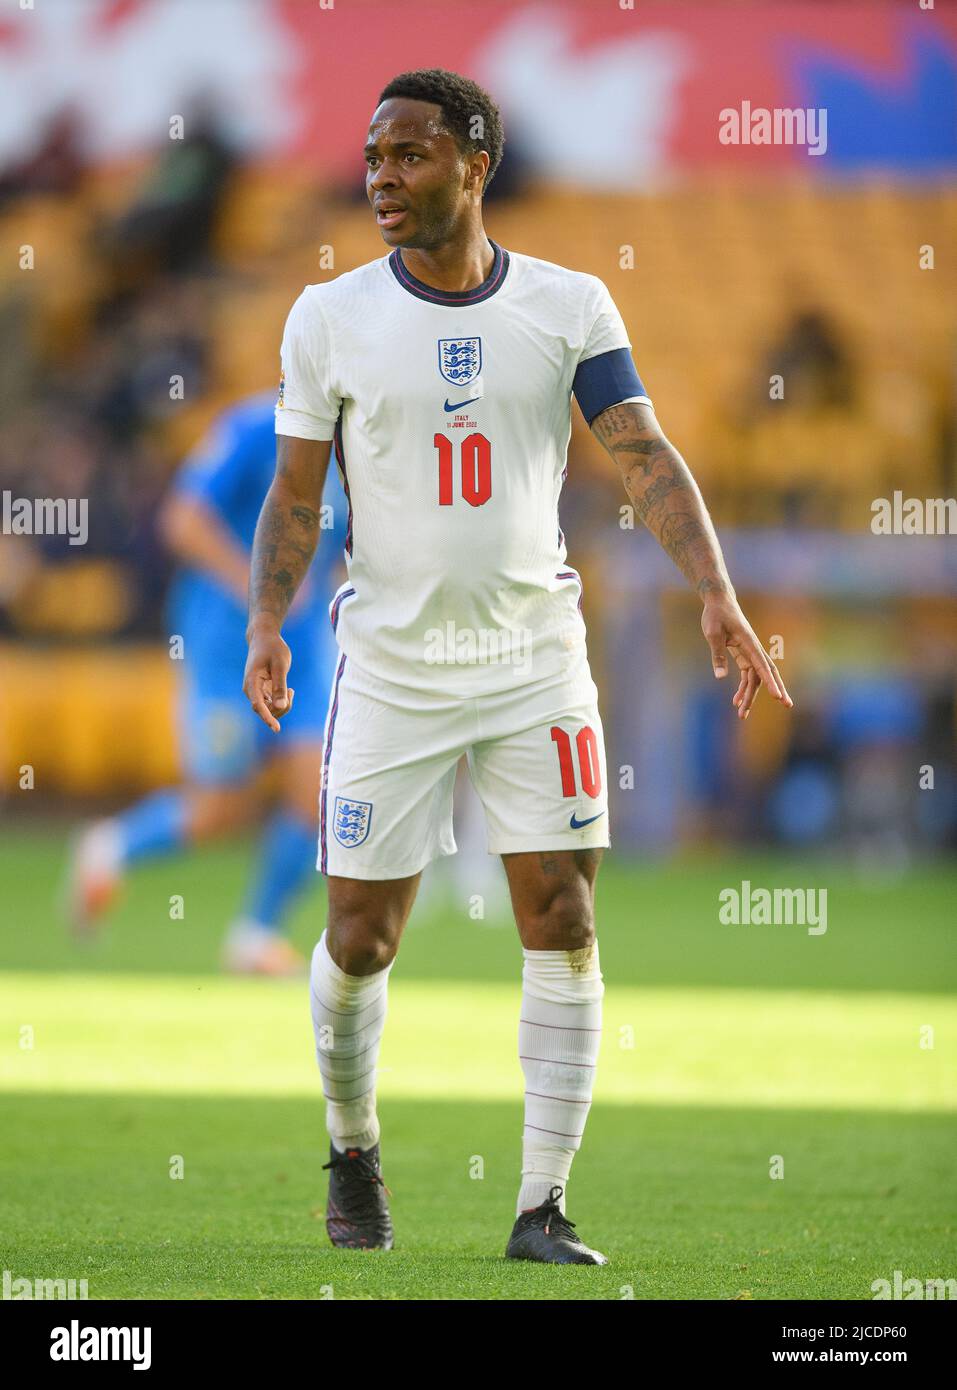 11 Jun 2022 - England v Italy - UEFA Nations League - Group 3 - Molineux Stadium  Raheem Sterling during the match against Italy. Picture Credit : © Mark Pain / Alamy Live News Stock Photo